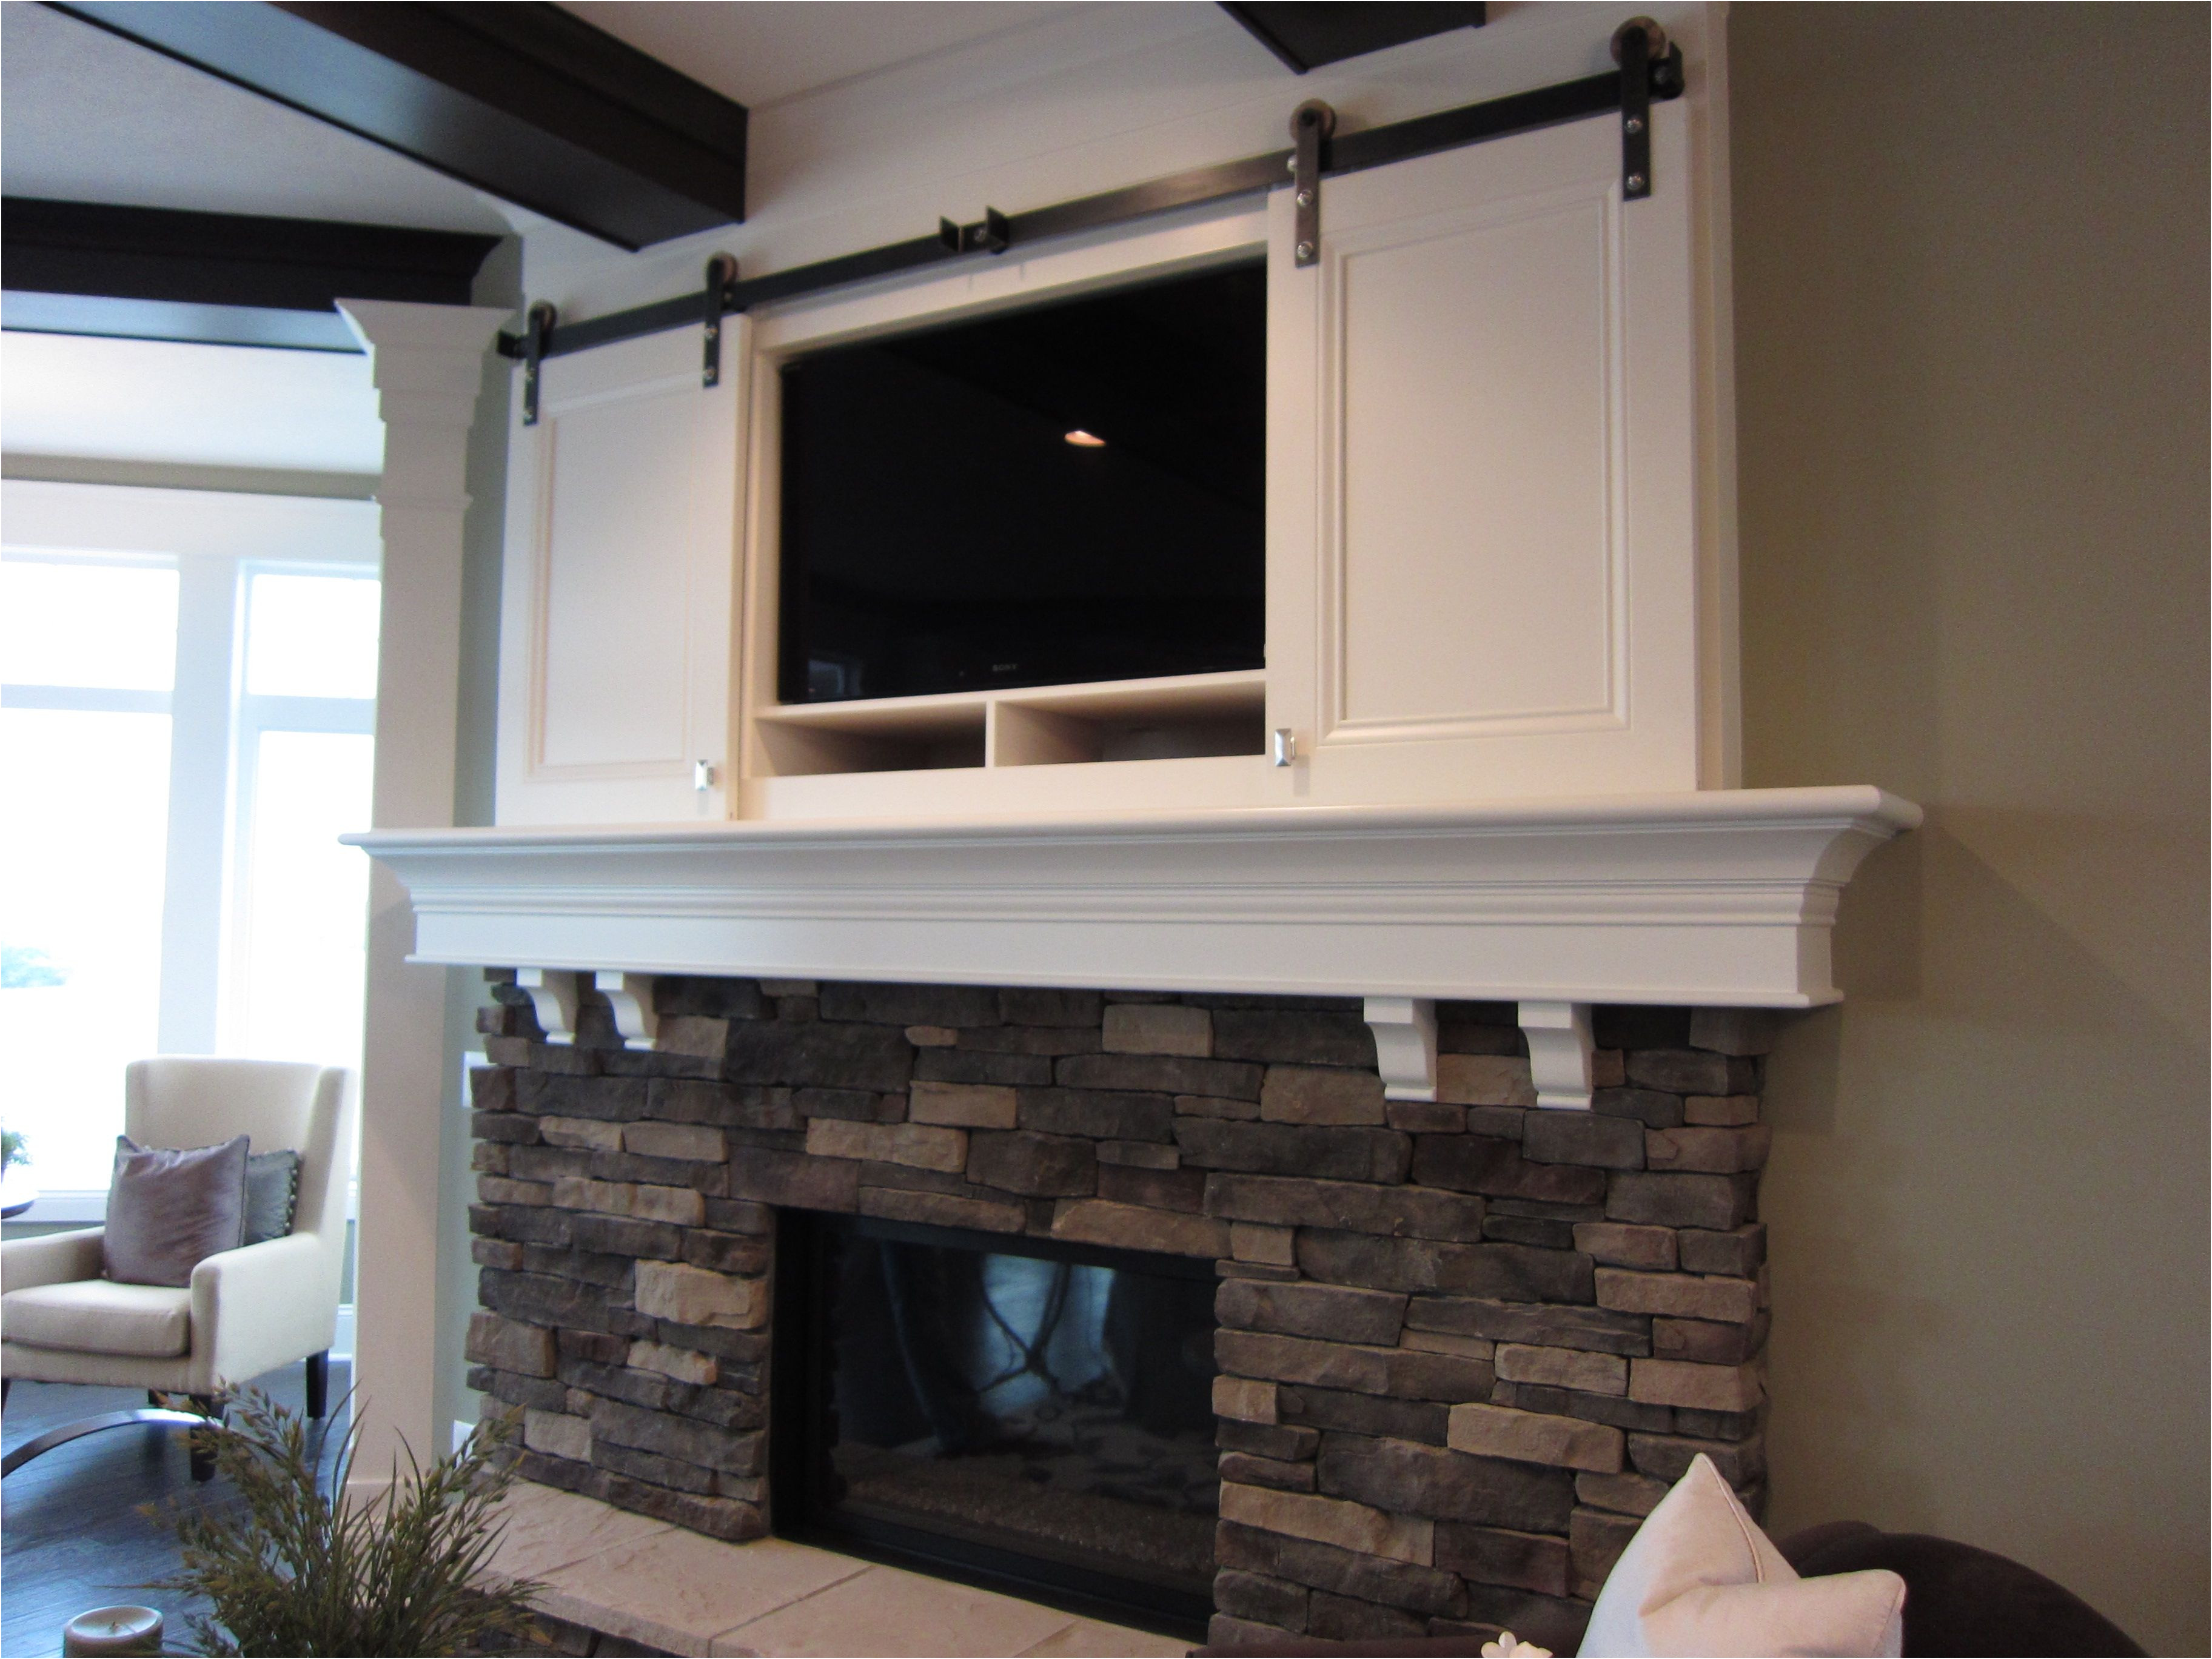 New Fireplace Ideas Tv Above